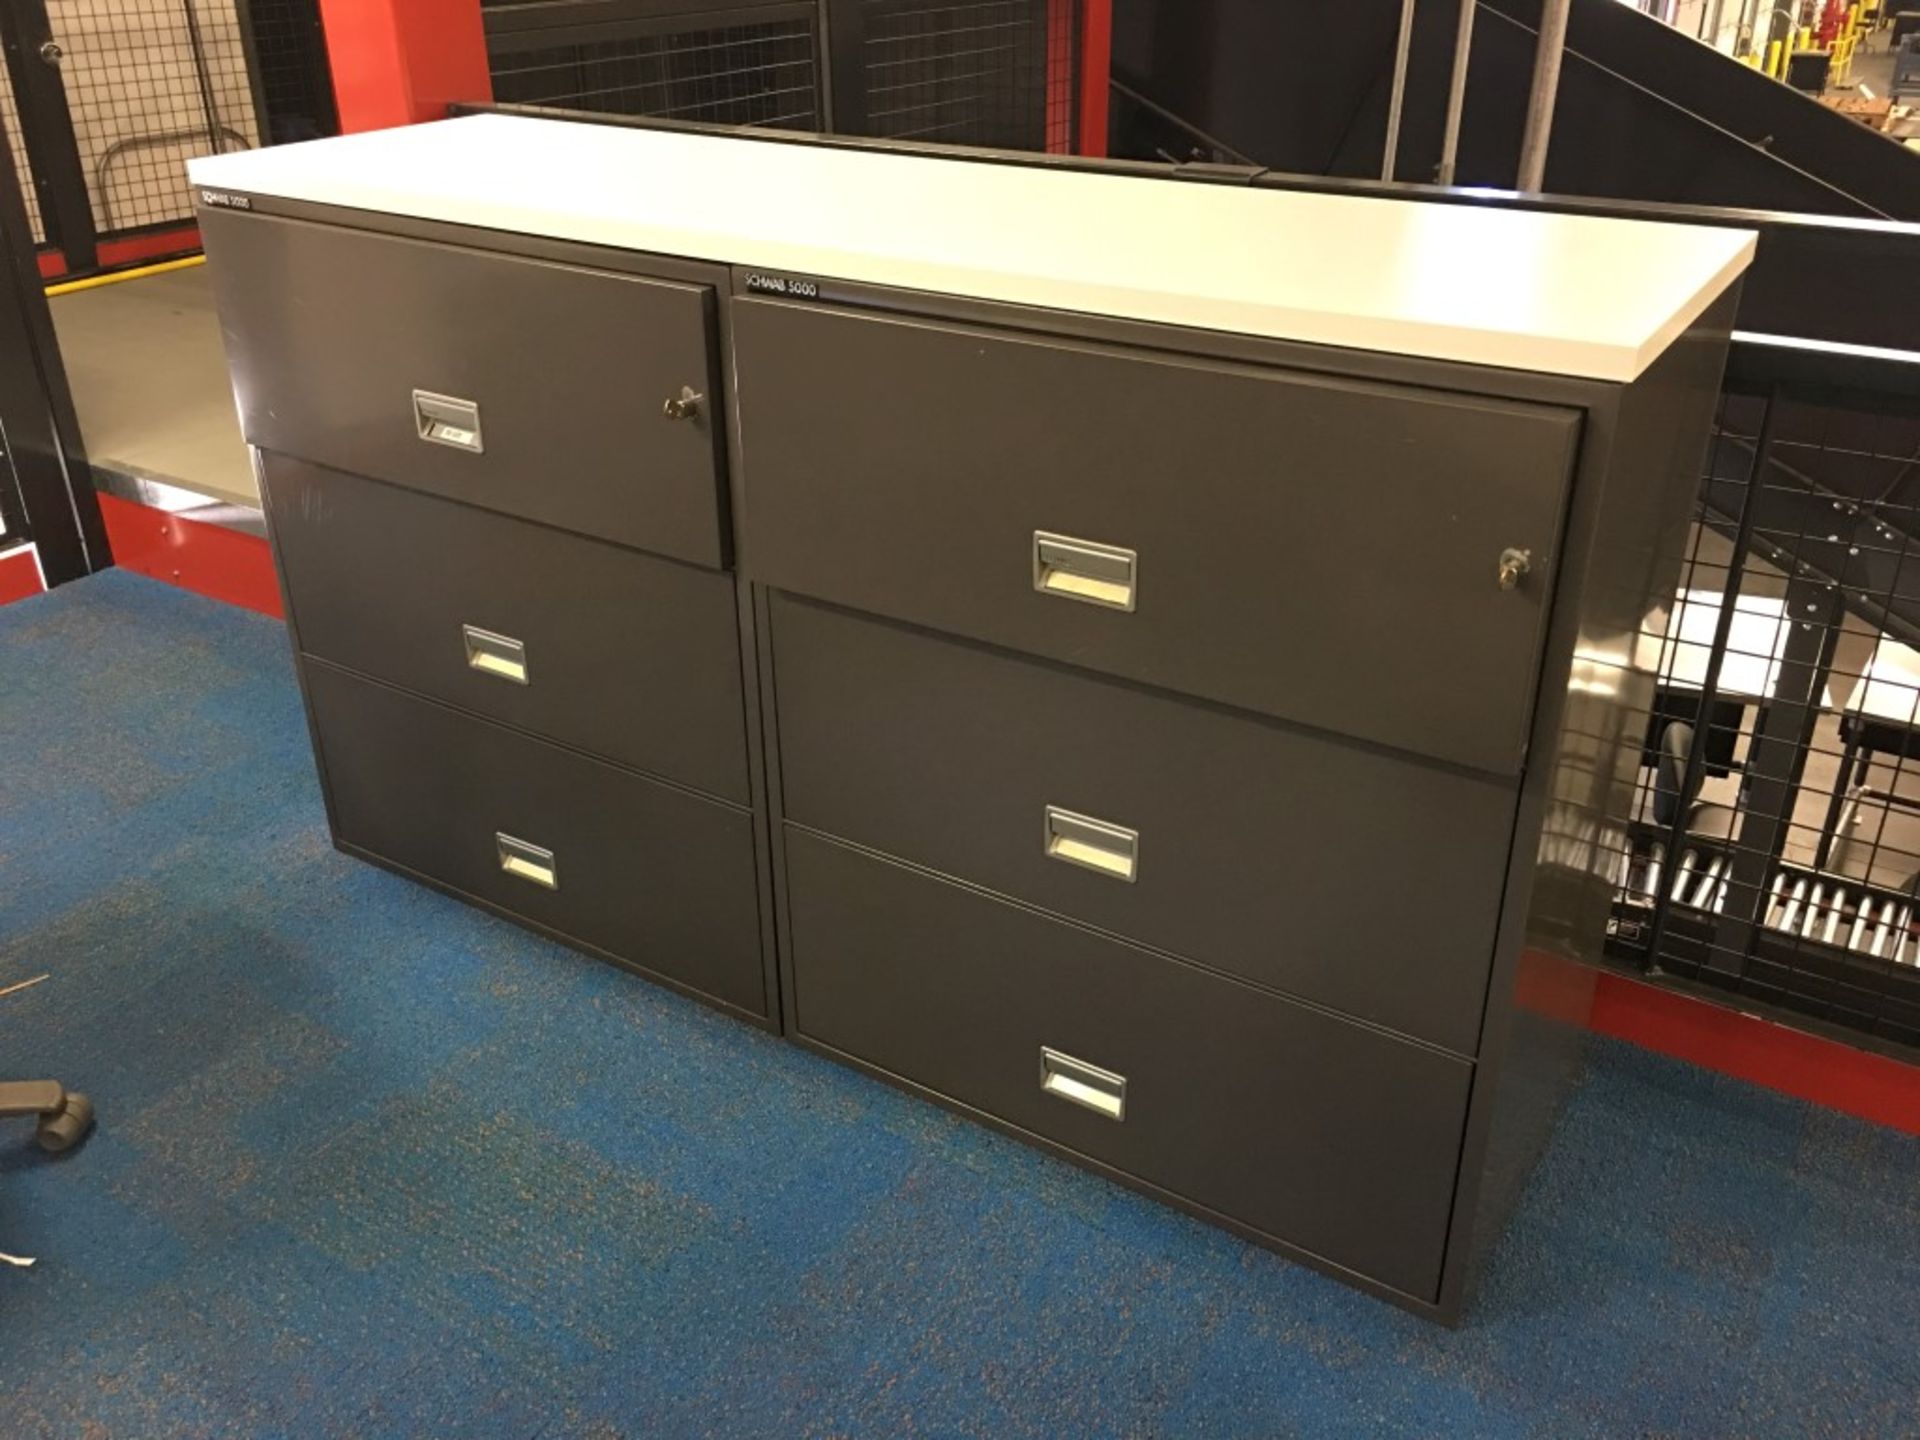 2 PCS OF SCHWAB 5000 FIRE PROOF FILE CABINETS WITH WHITE LAMINATE TABLE TOP. WITH KEYS.